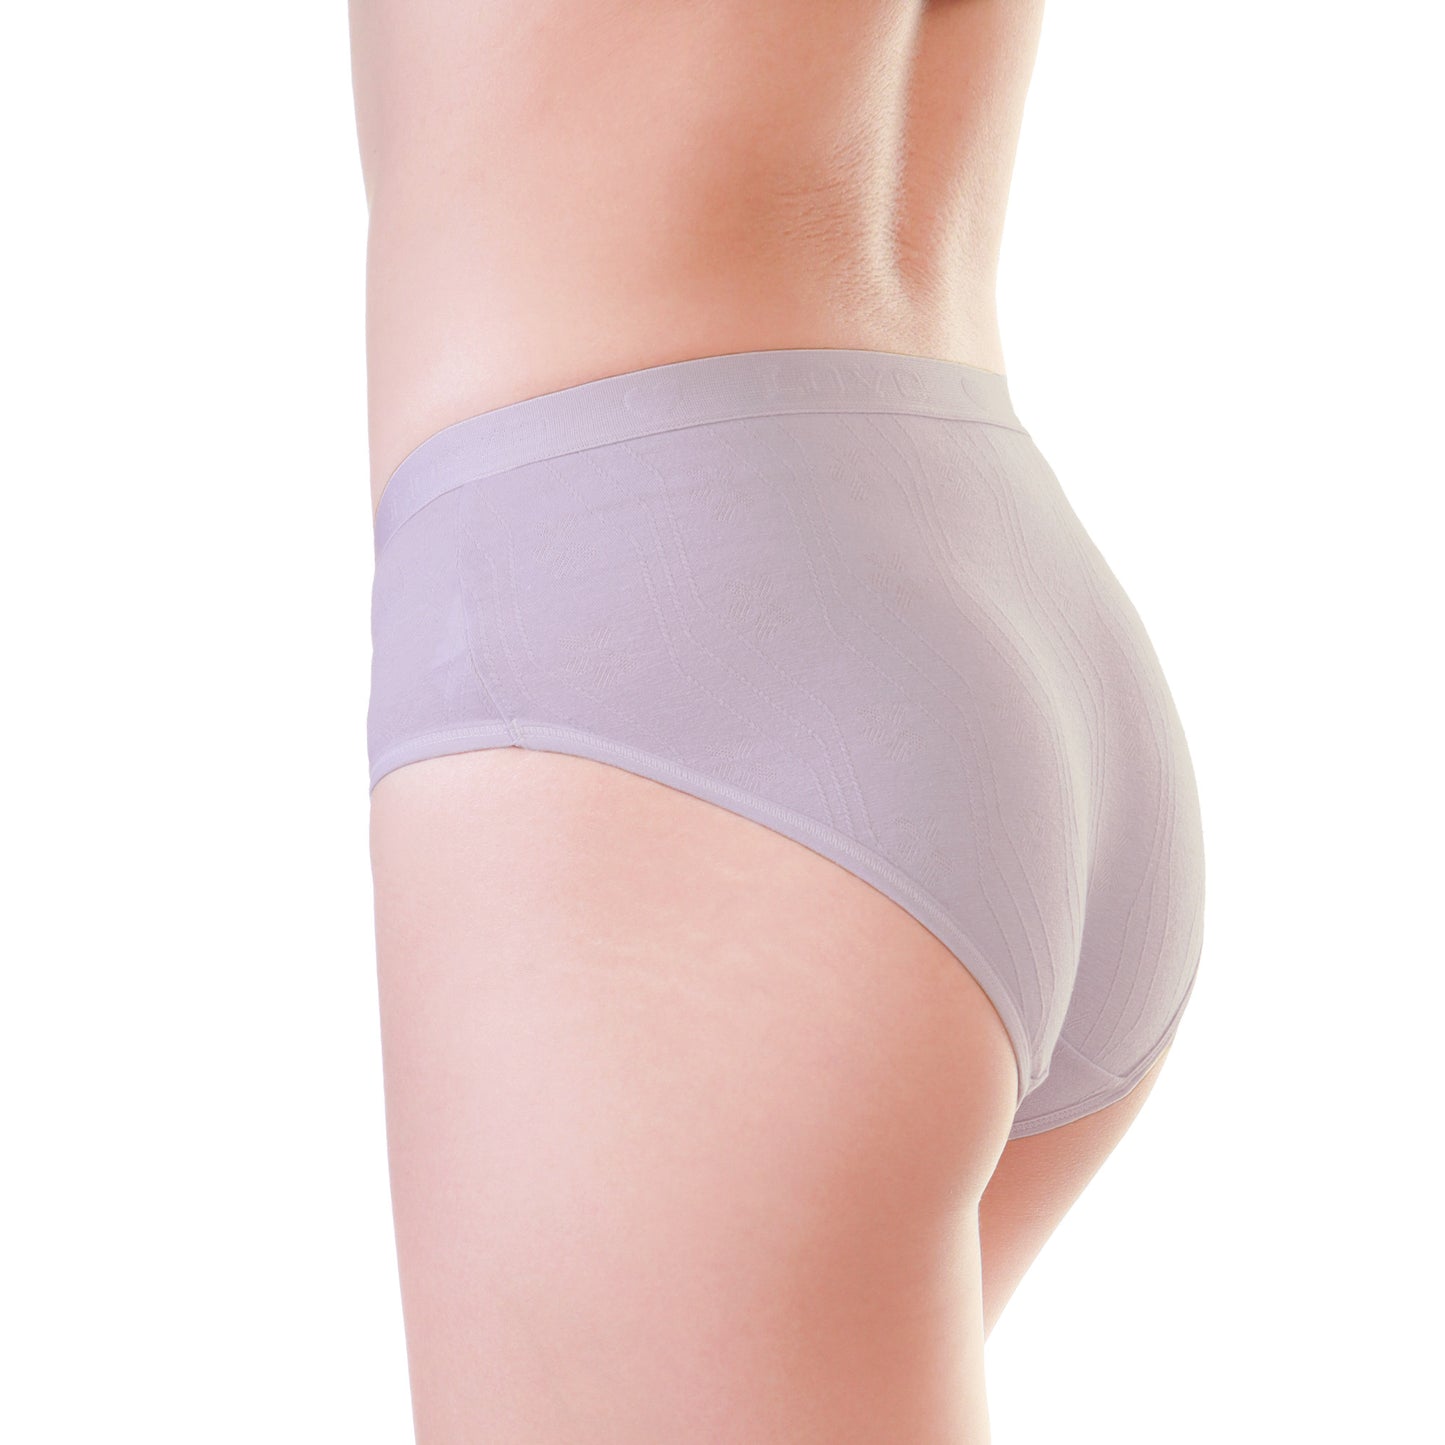 Angelina Cotton Hiphugger Panties with Textured Lines and Flowers (12-Pack), #G6744